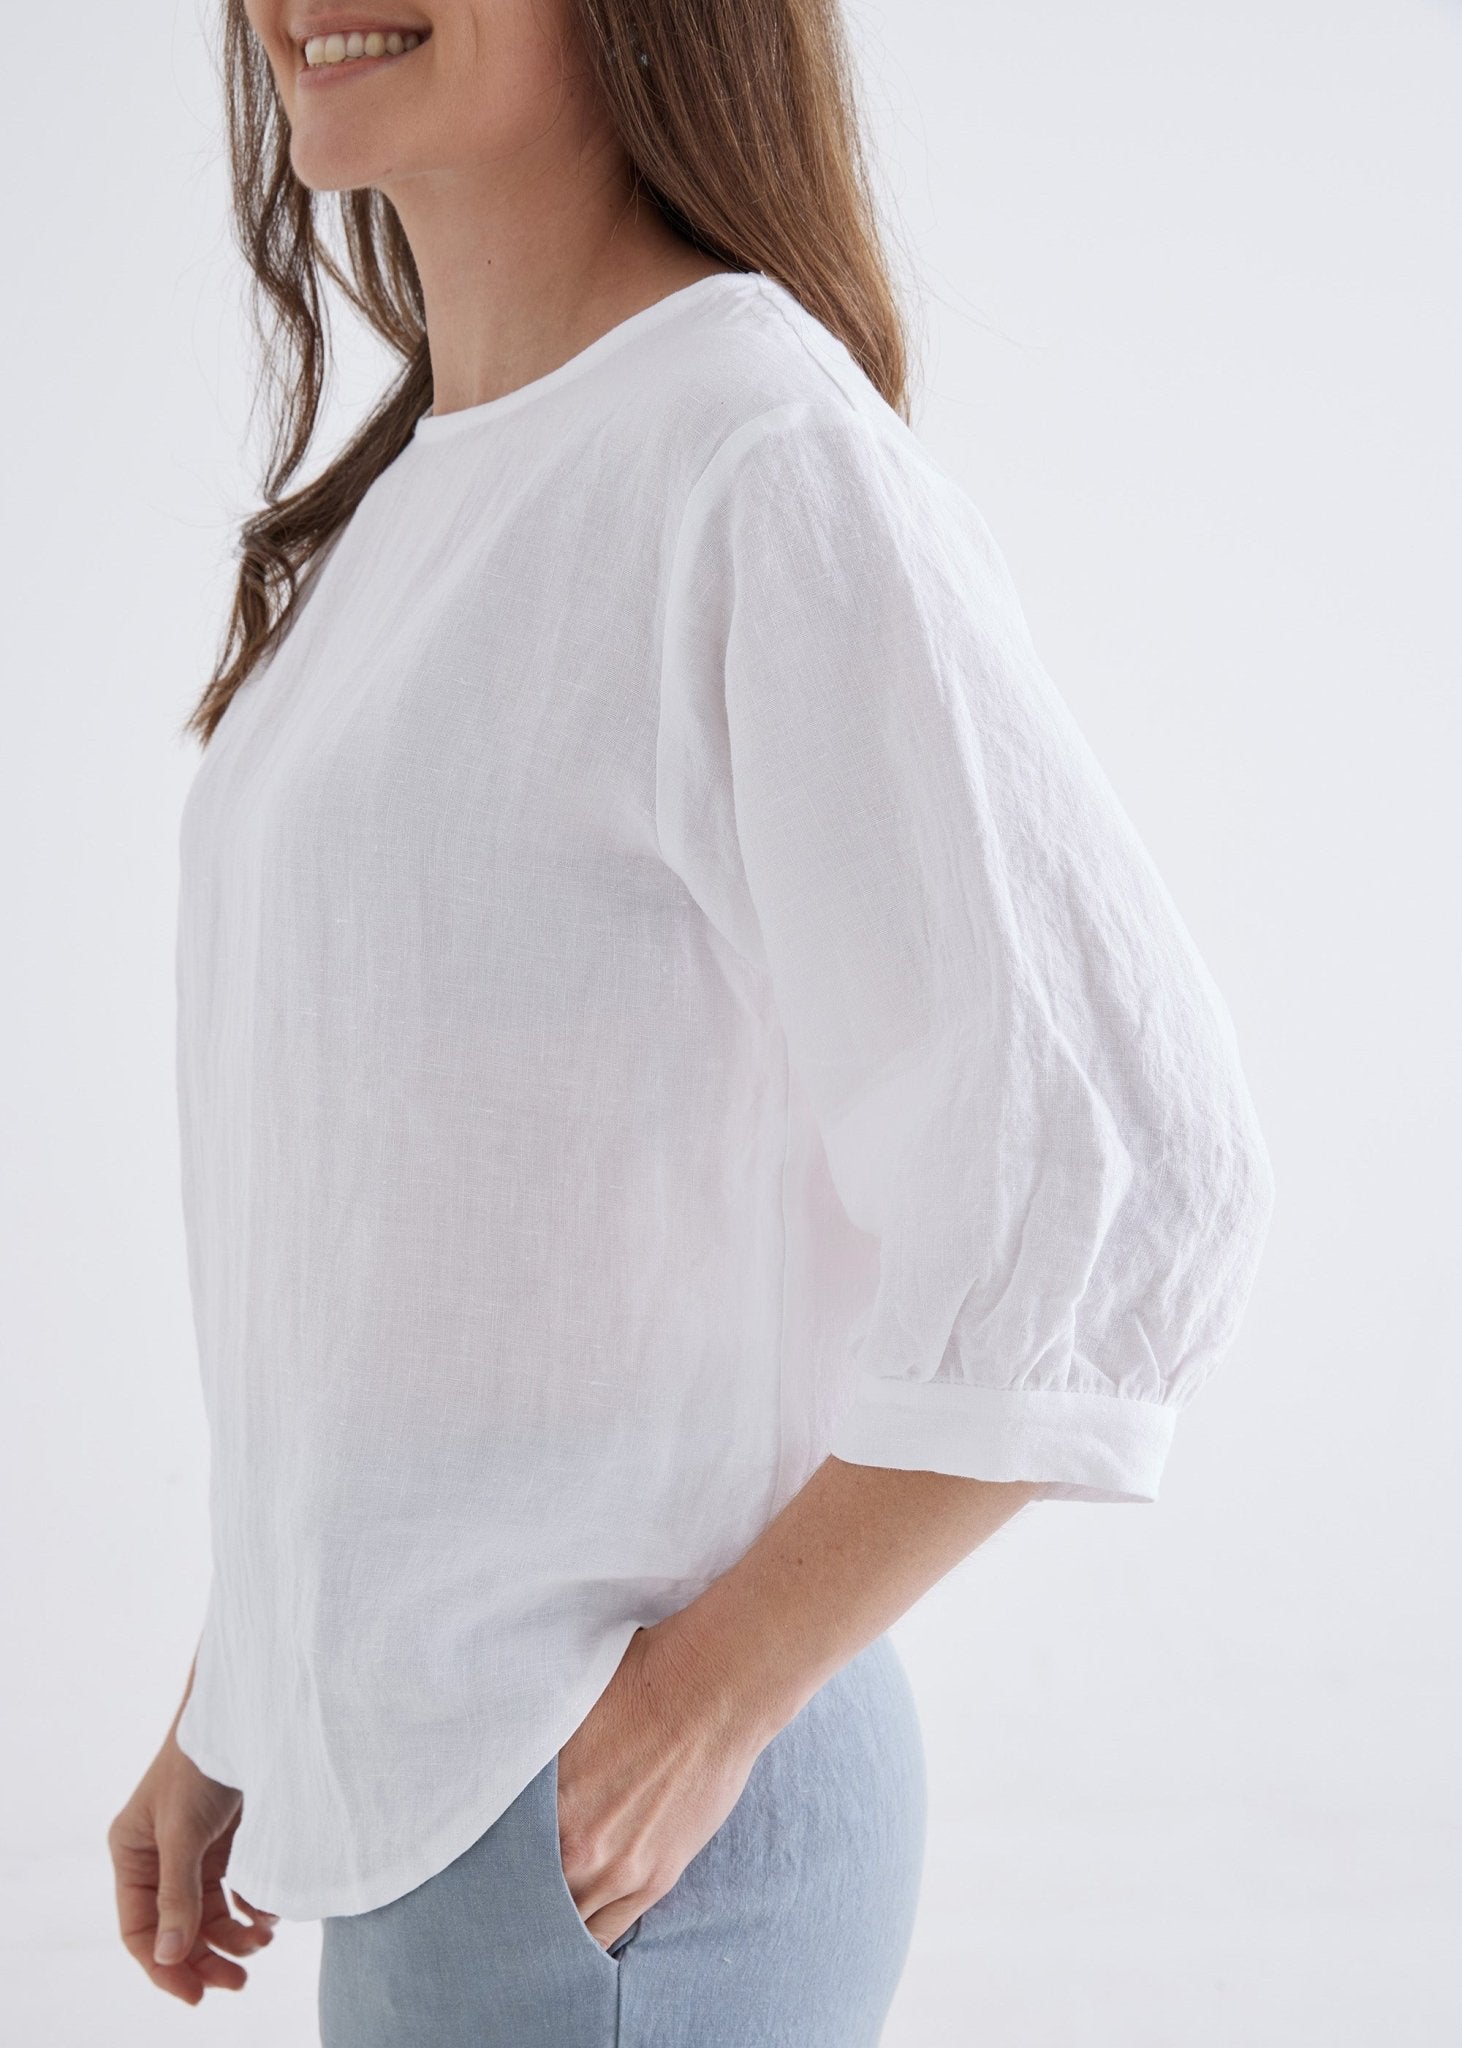 Laura Linen Top in White-Devina Louise-stride